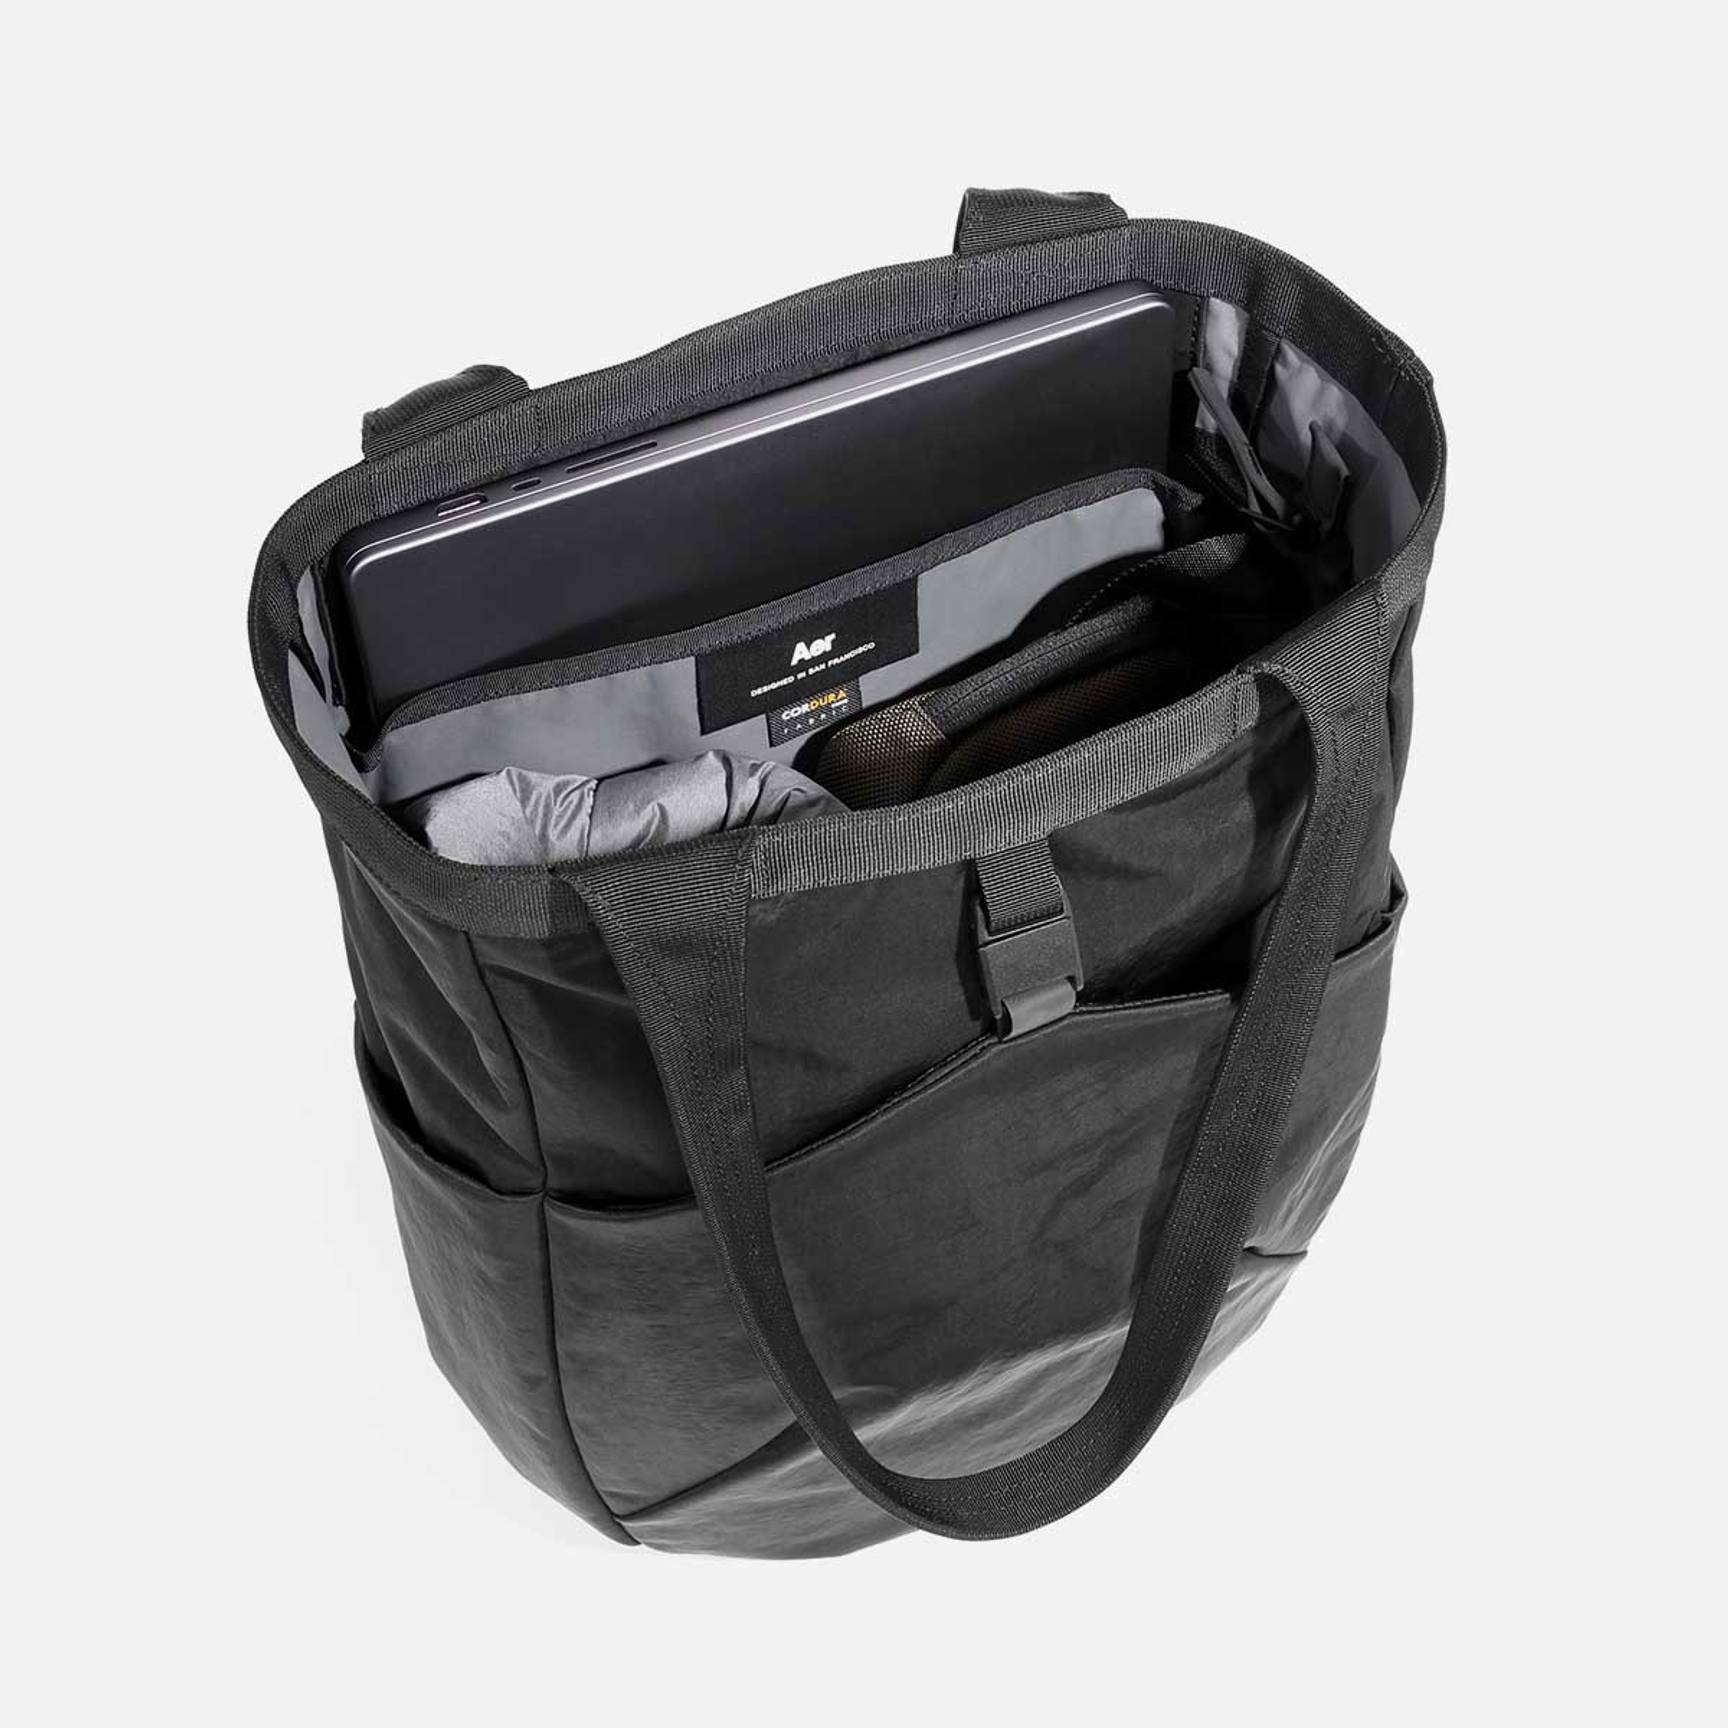 Aer Go Tote 2 Review (2 Weeks of Use) 